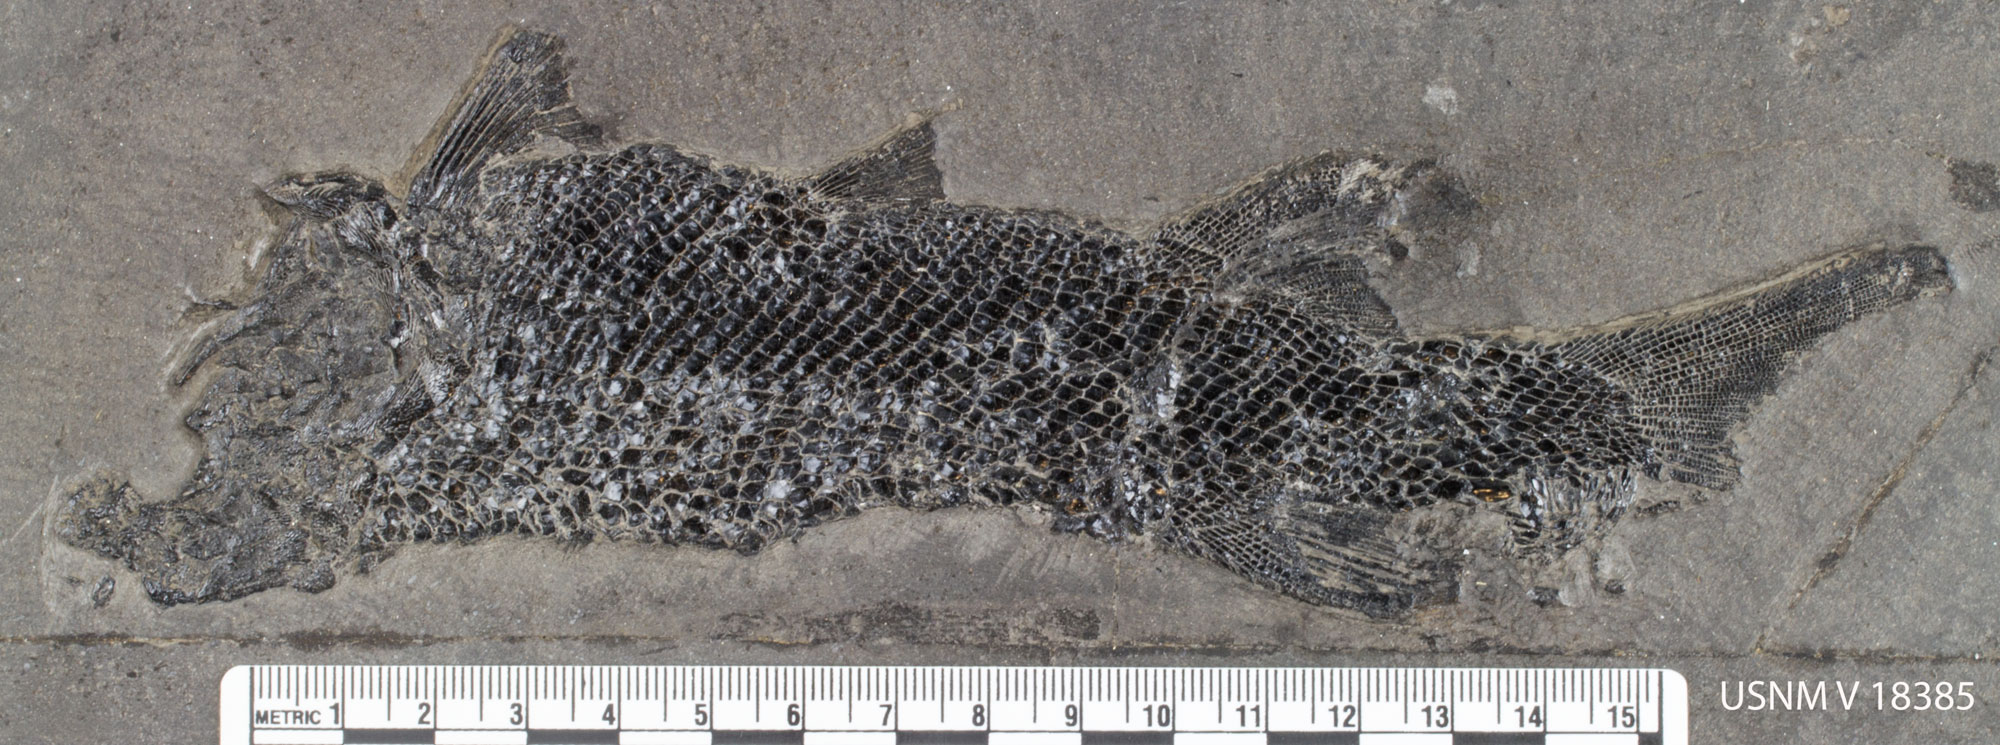 Photo of a fossil of the fish Redfieldia from the Triassic of Virginia. The head of the fish is only partially preserved. The body is covering with diamond-shaped scales. There appear to be three finds on the fish's back, maybe a fin on the bottom of the body near the tail, and an asymmetrical tail fin.